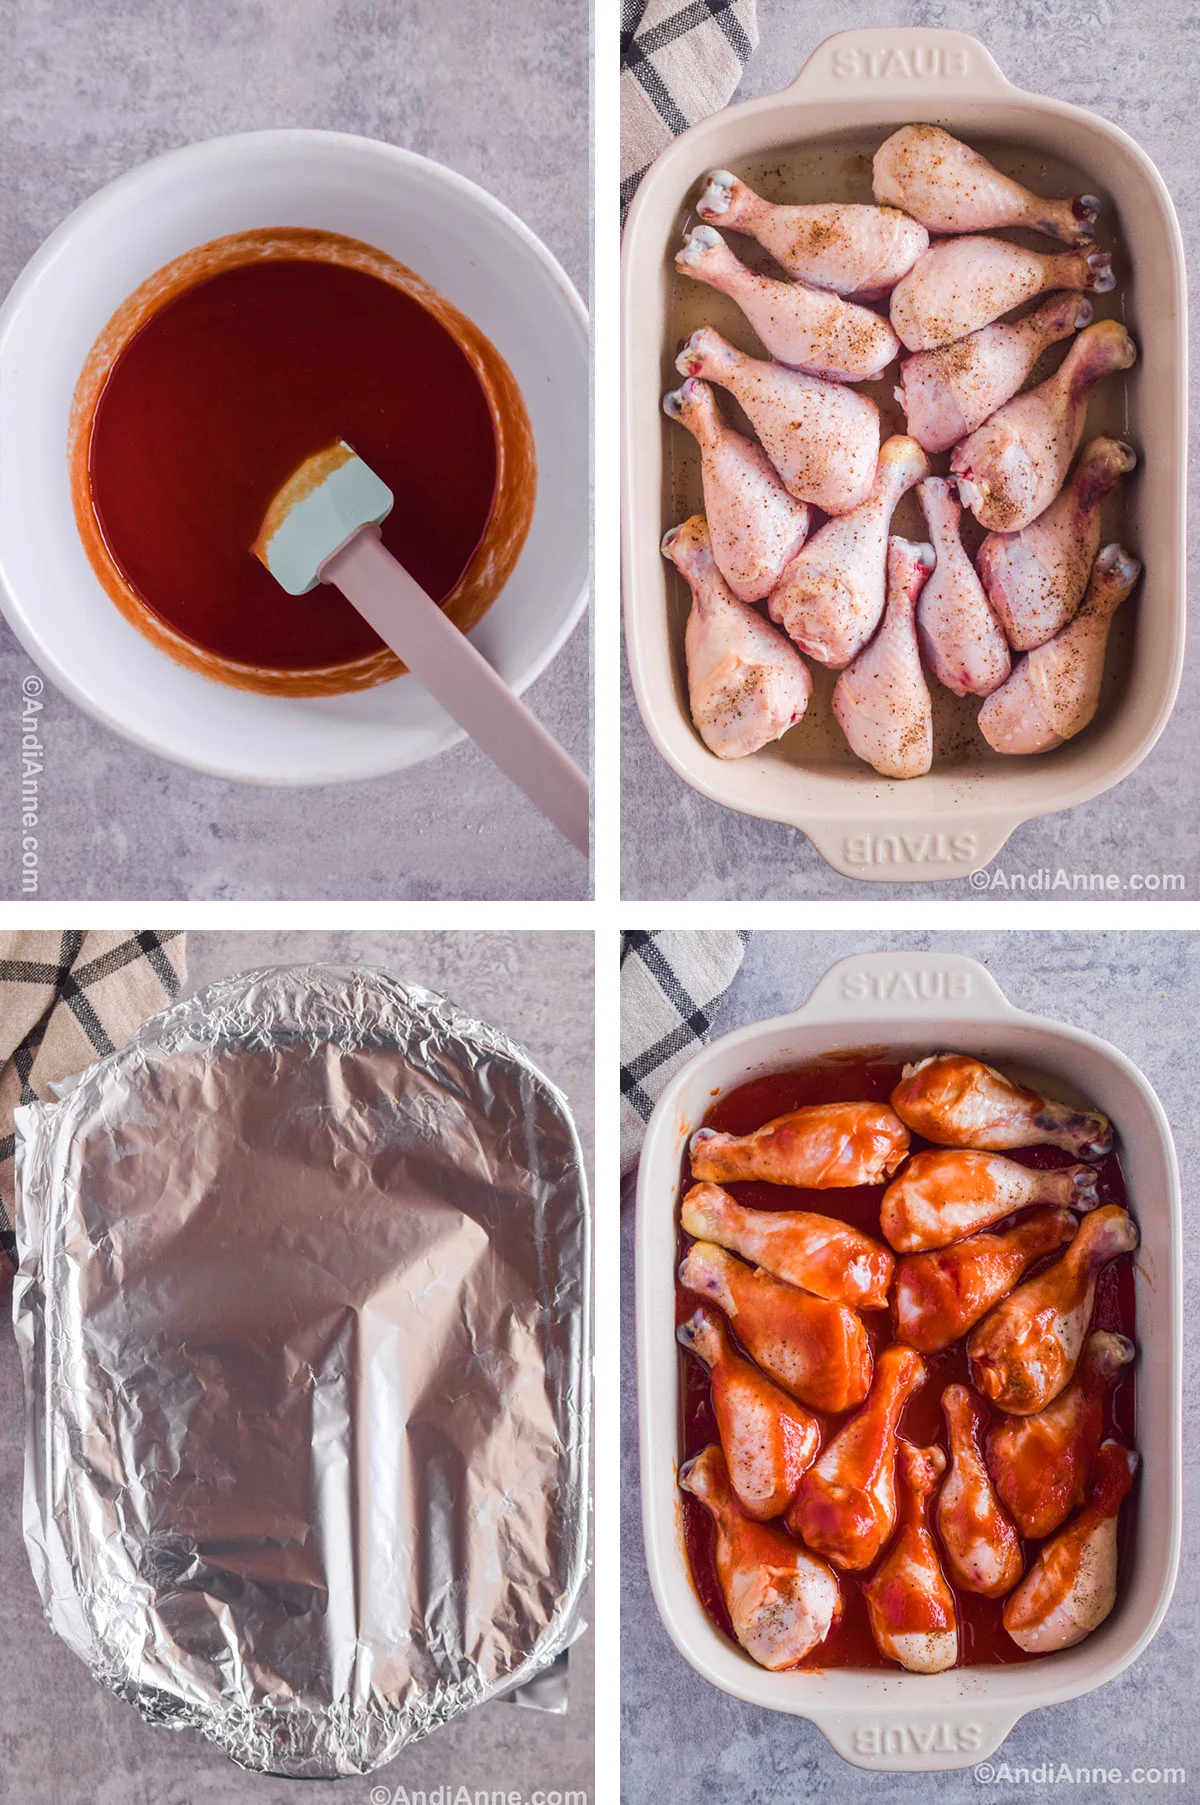 Four images showing steps to make recipe including bowl of sweet and sour sauce with spatula, casserole dish with raw chicken legs, foil covering casserole dish and sweet and sour sauce covering chicken legs.